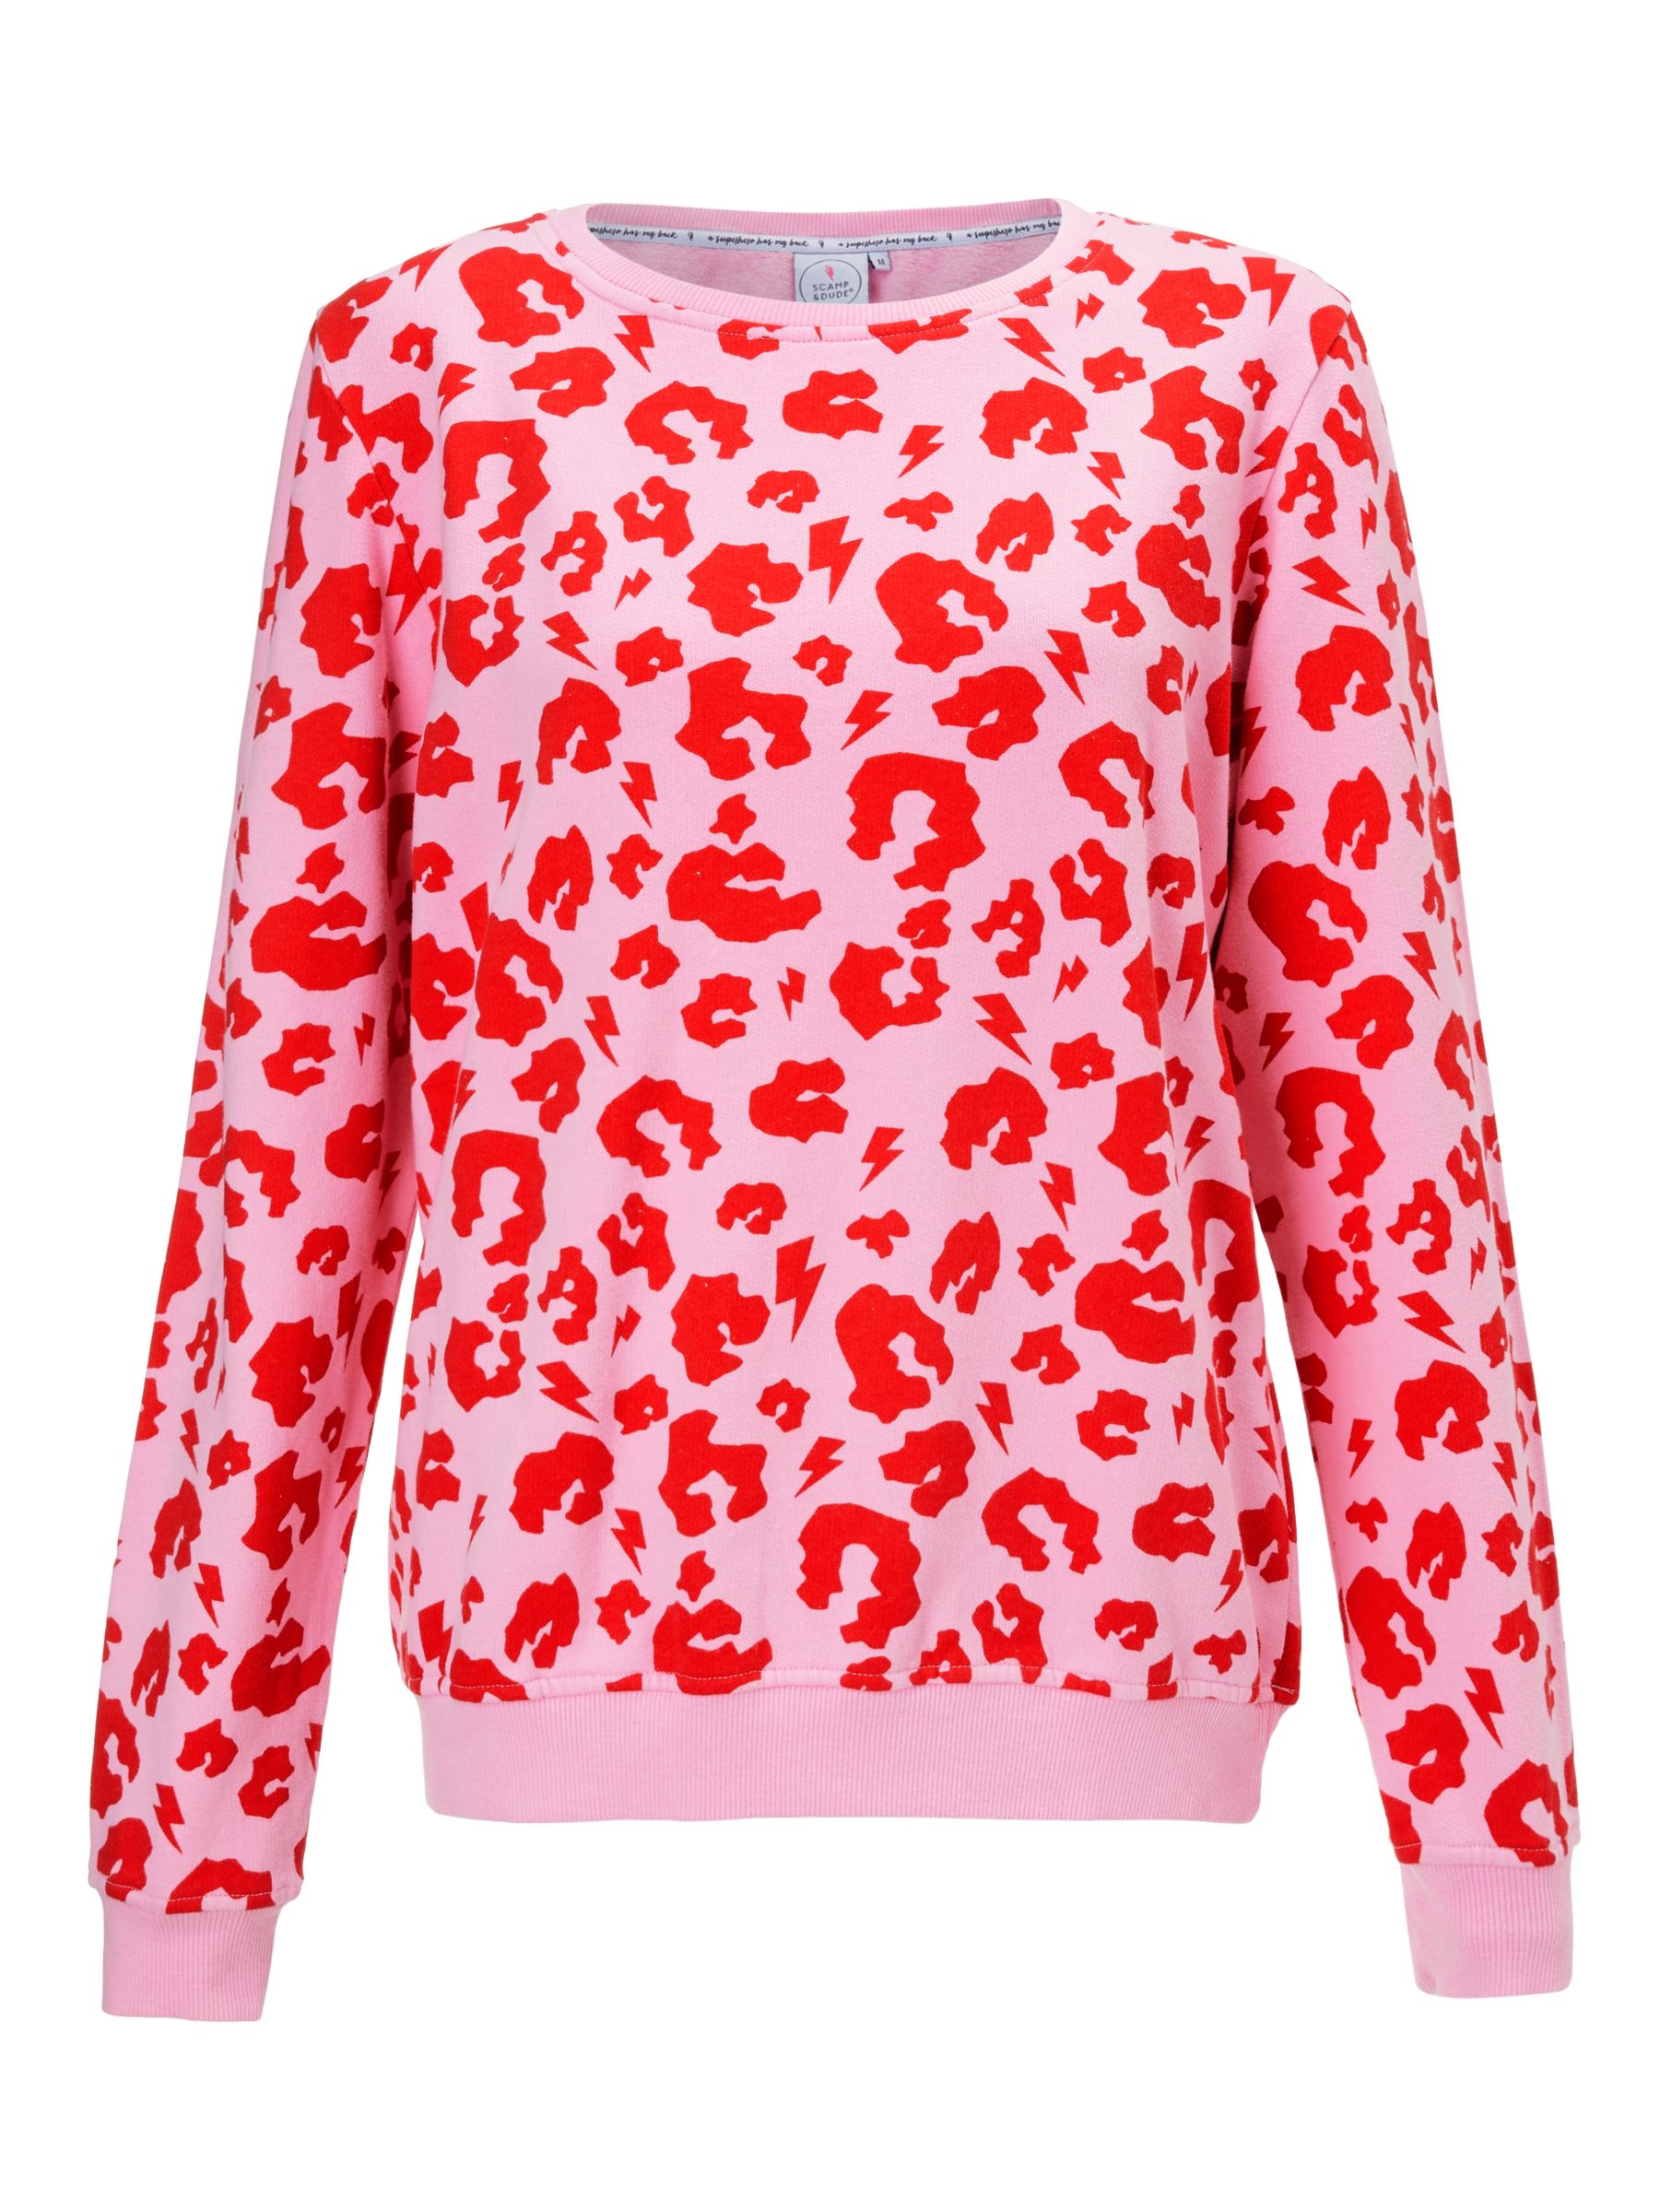 Pink & Red Leopard Sweater